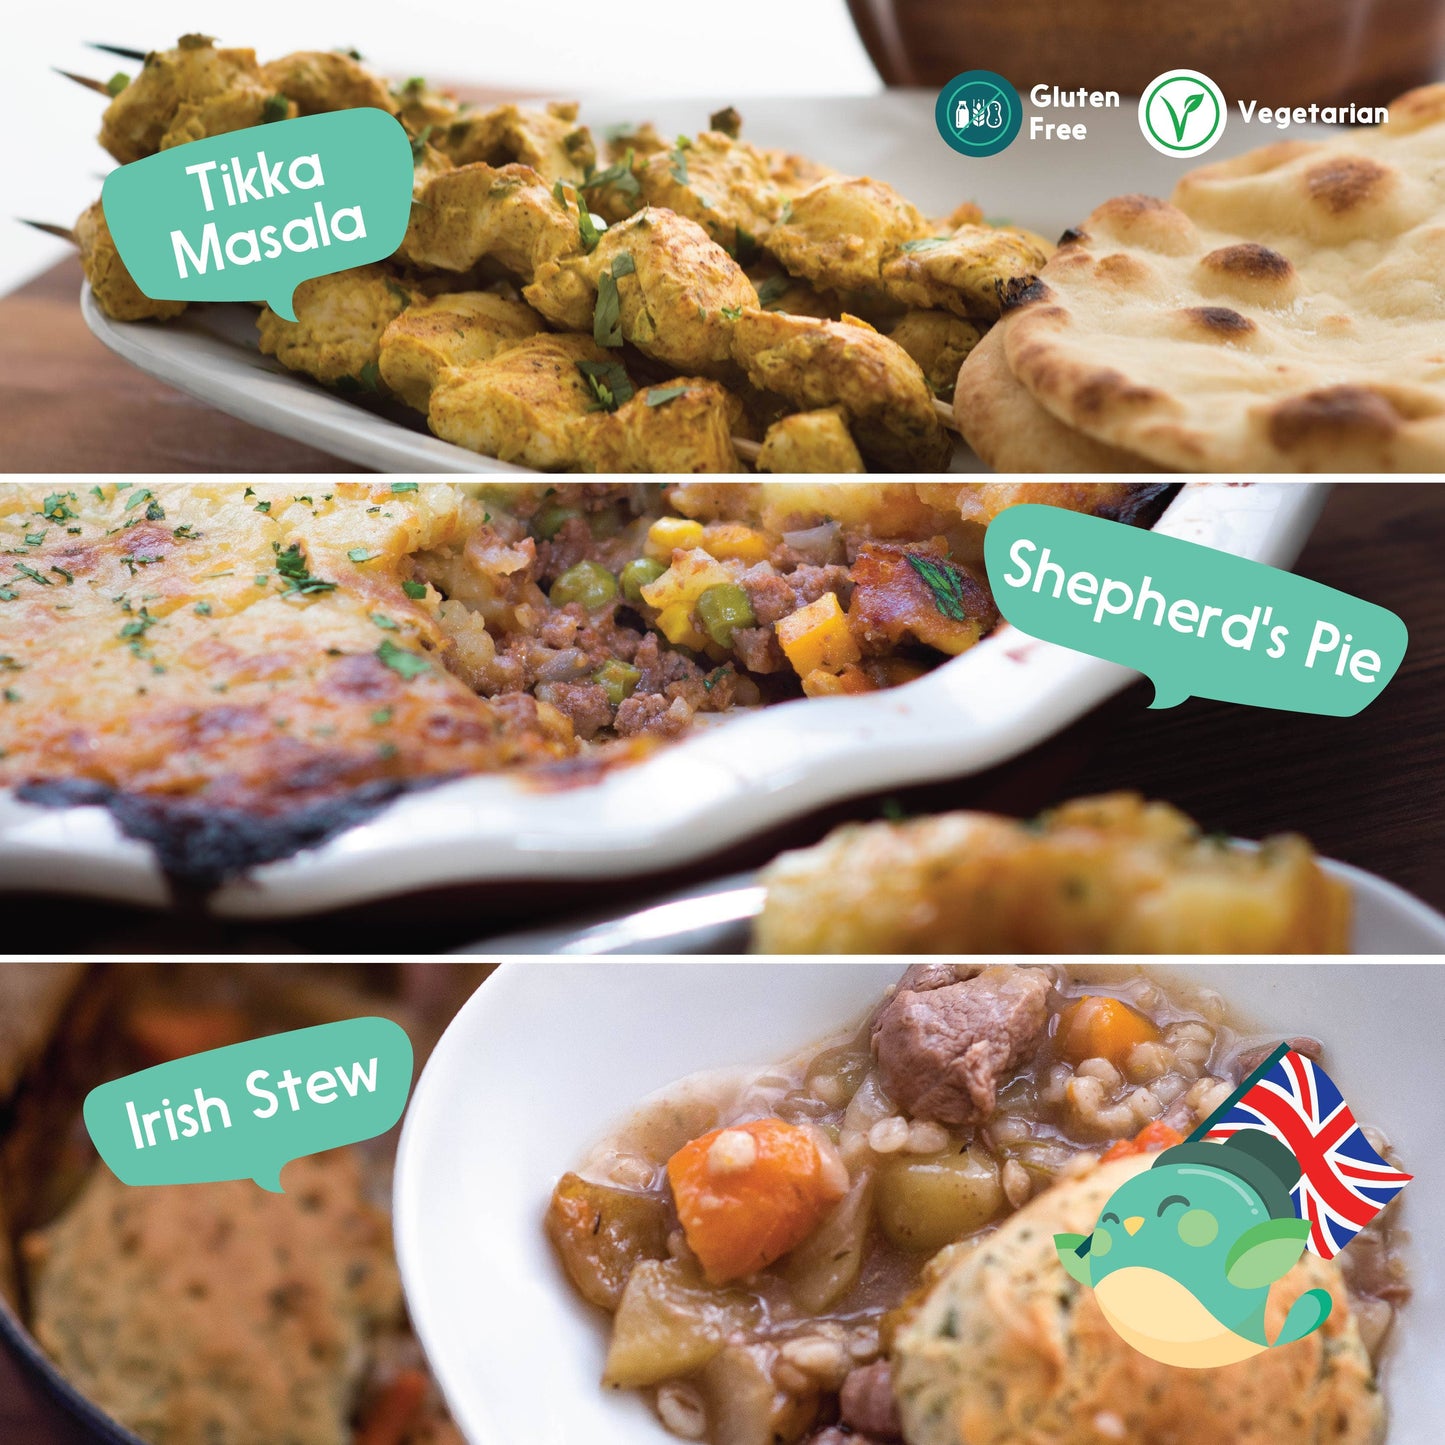 explore UK food & cultural experiential cooking kit